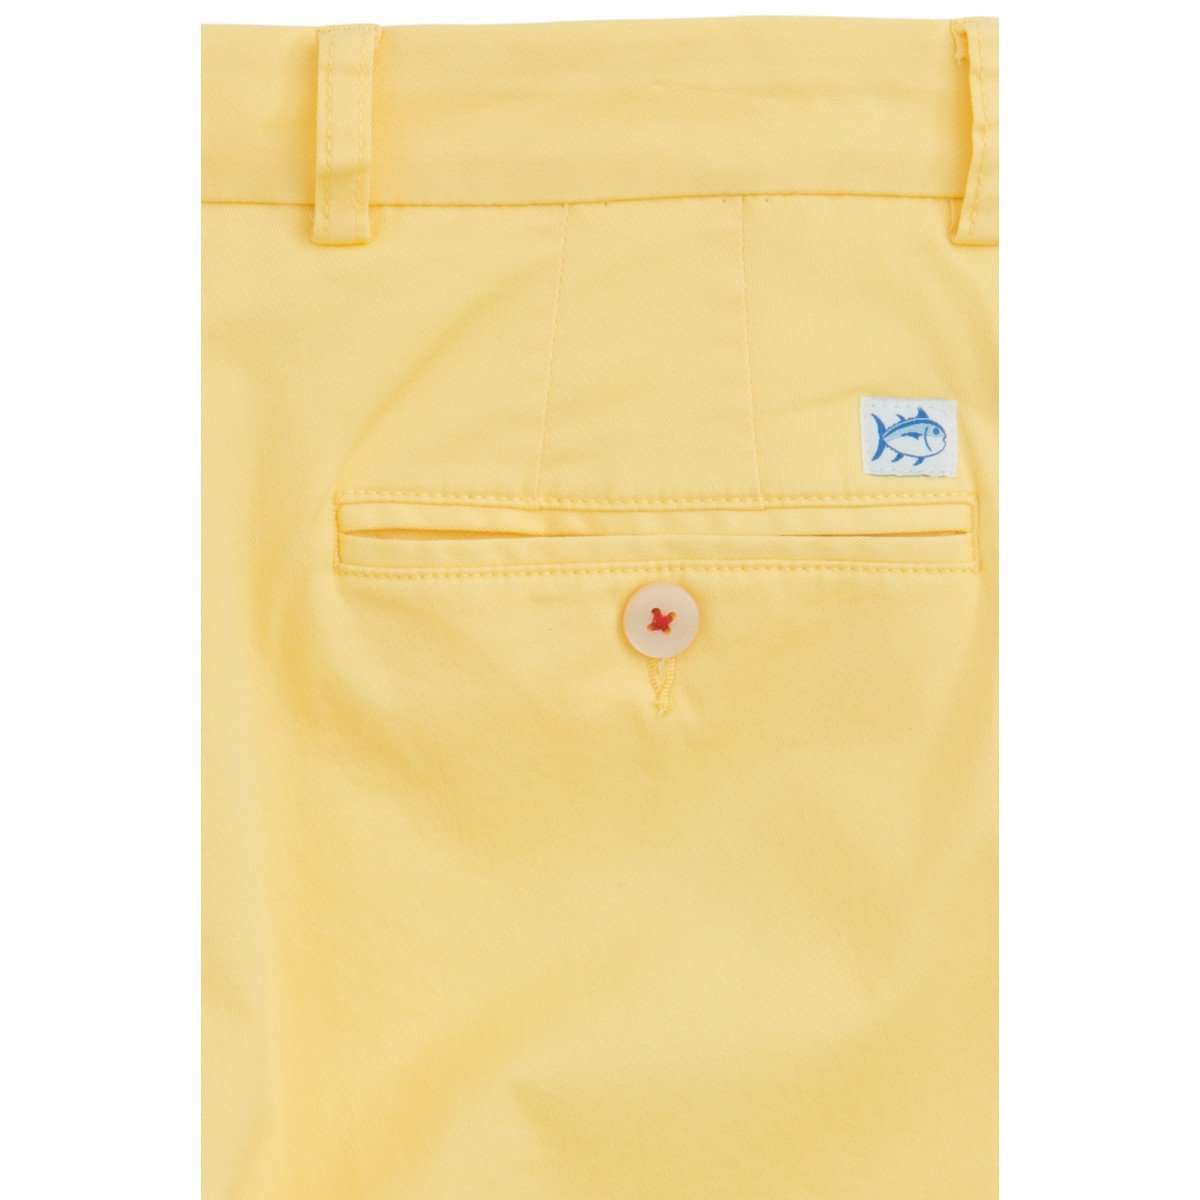 Summer Weight 7" Channel Marker Short in Sunshine by Southern Tide - Country Club Prep